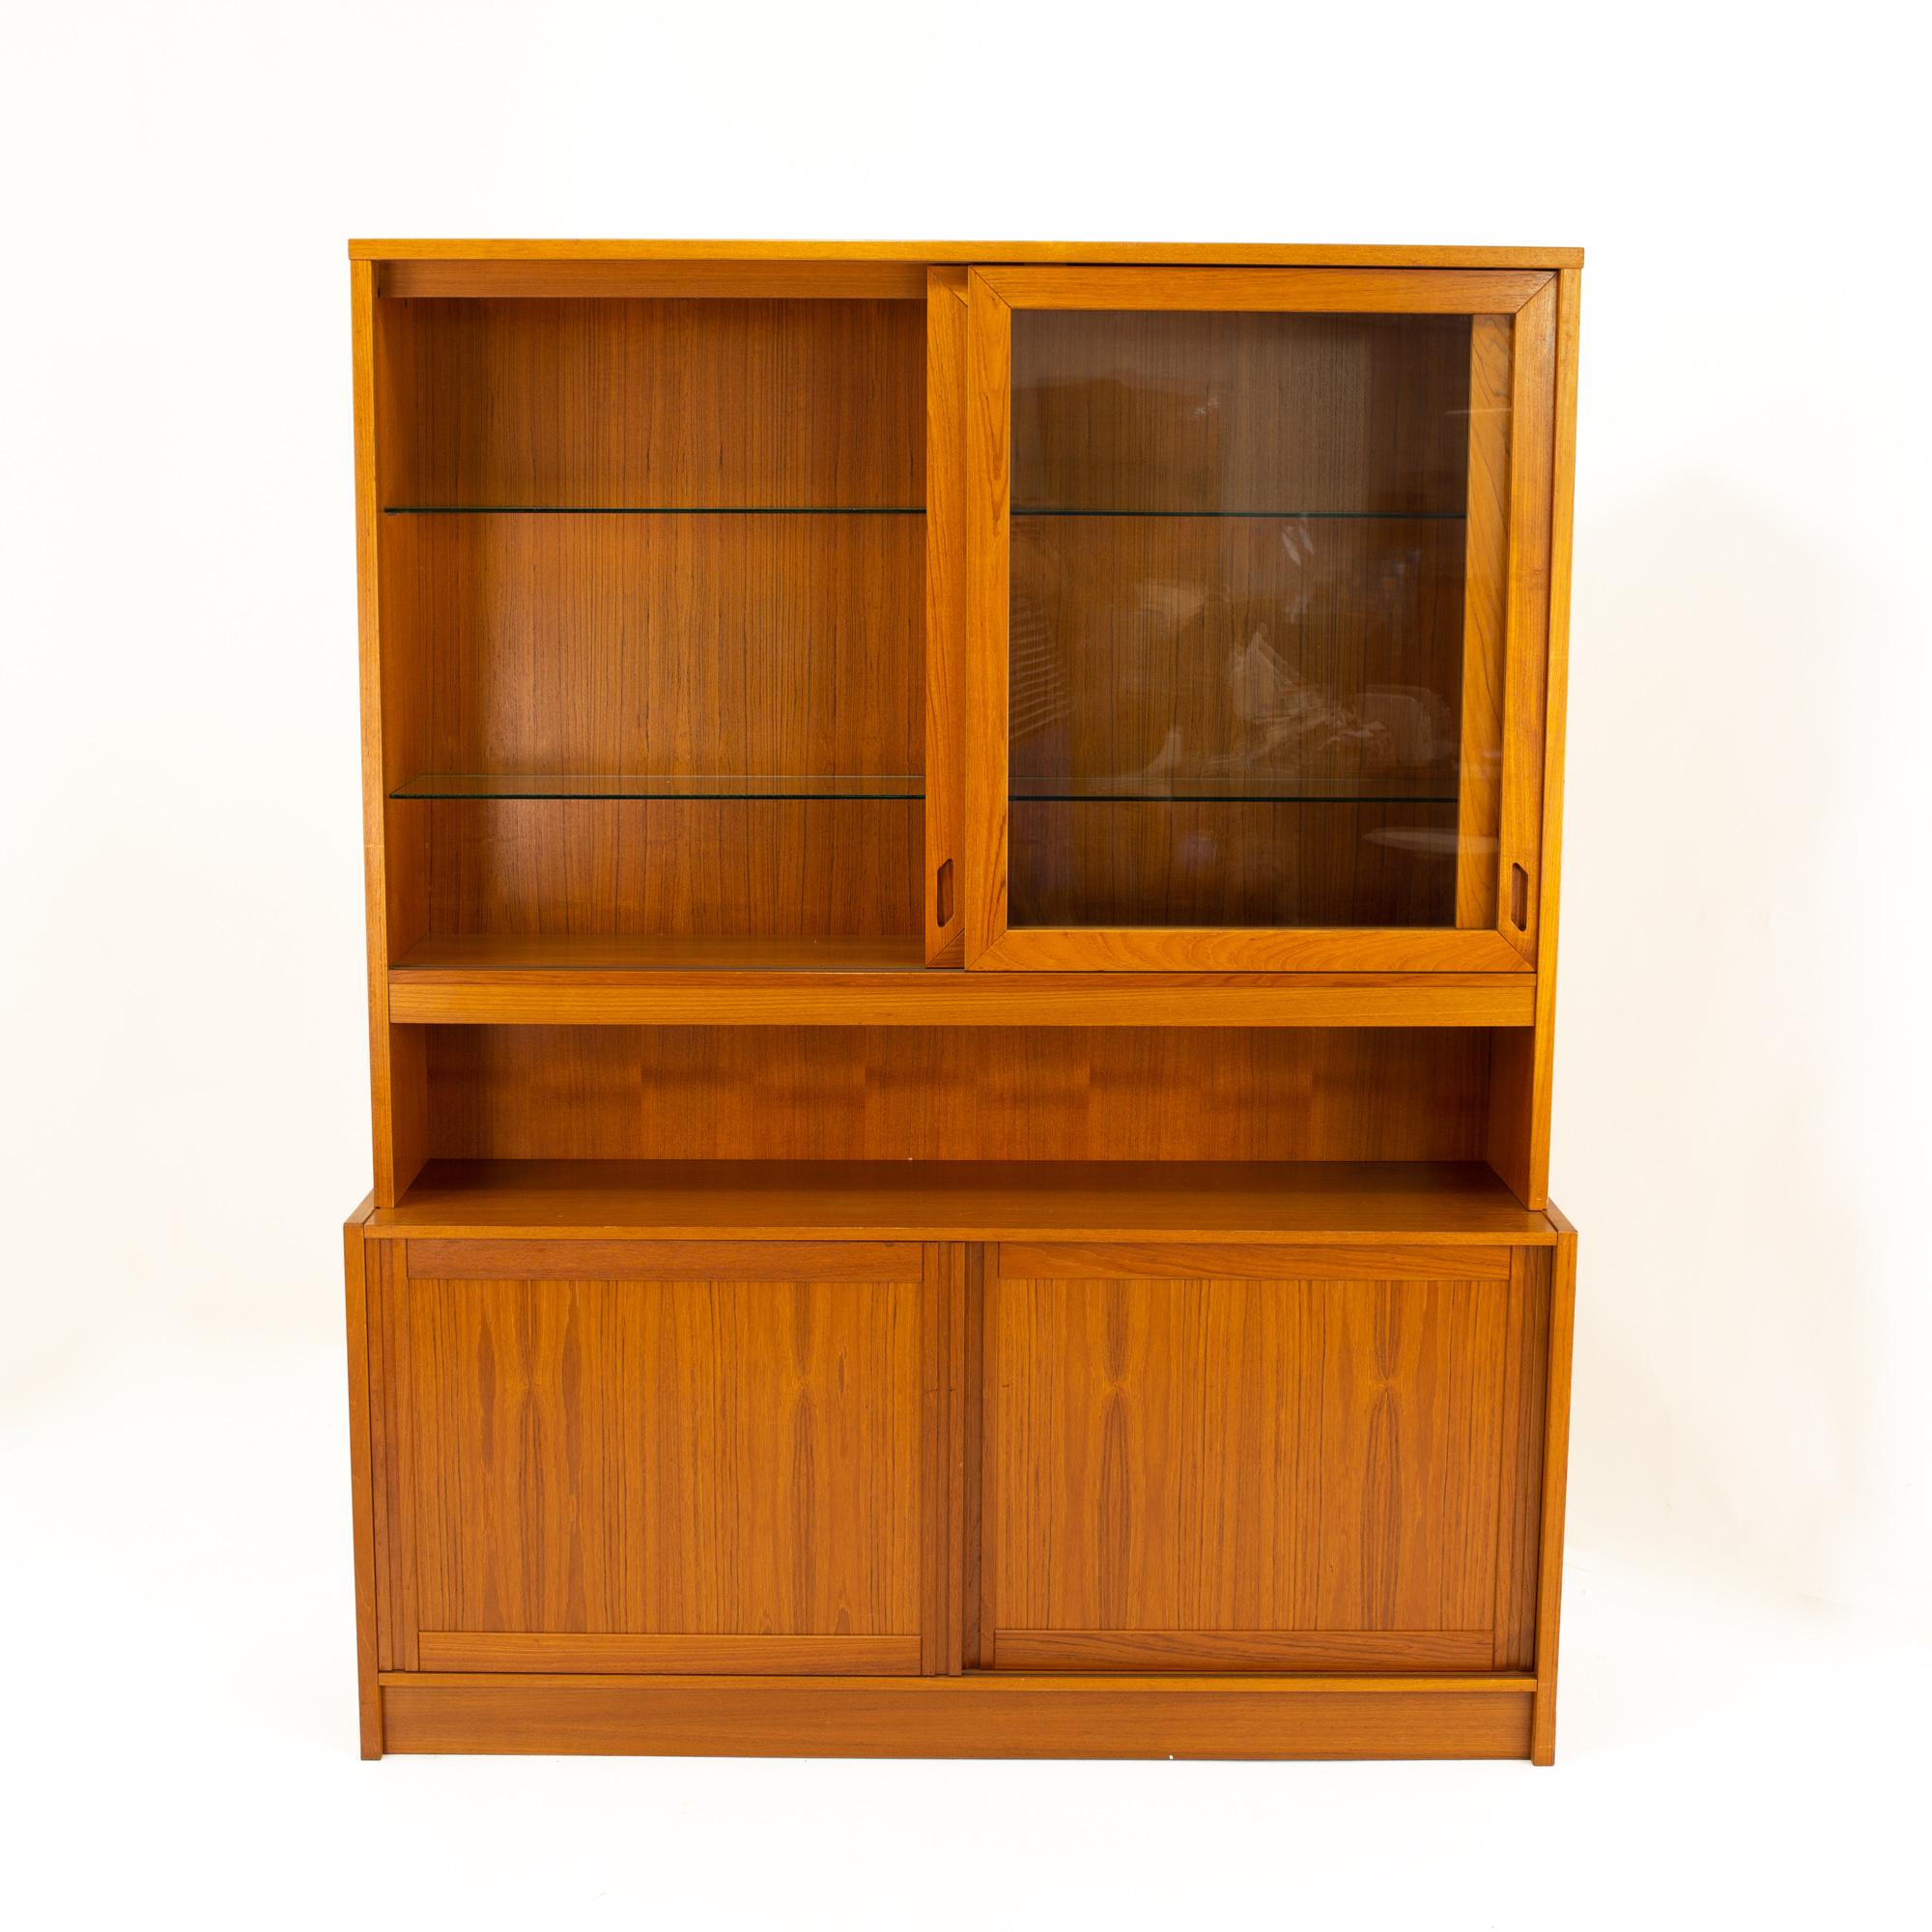 Mid Century Danish teak sliding door credenza buffet and hutch
Credenza and hutch measures: 60 wide x 16 deep x 74.5 high

All pieces of furniture can be had in what we call restored vintage condition. This means the piece is restored upon purchase